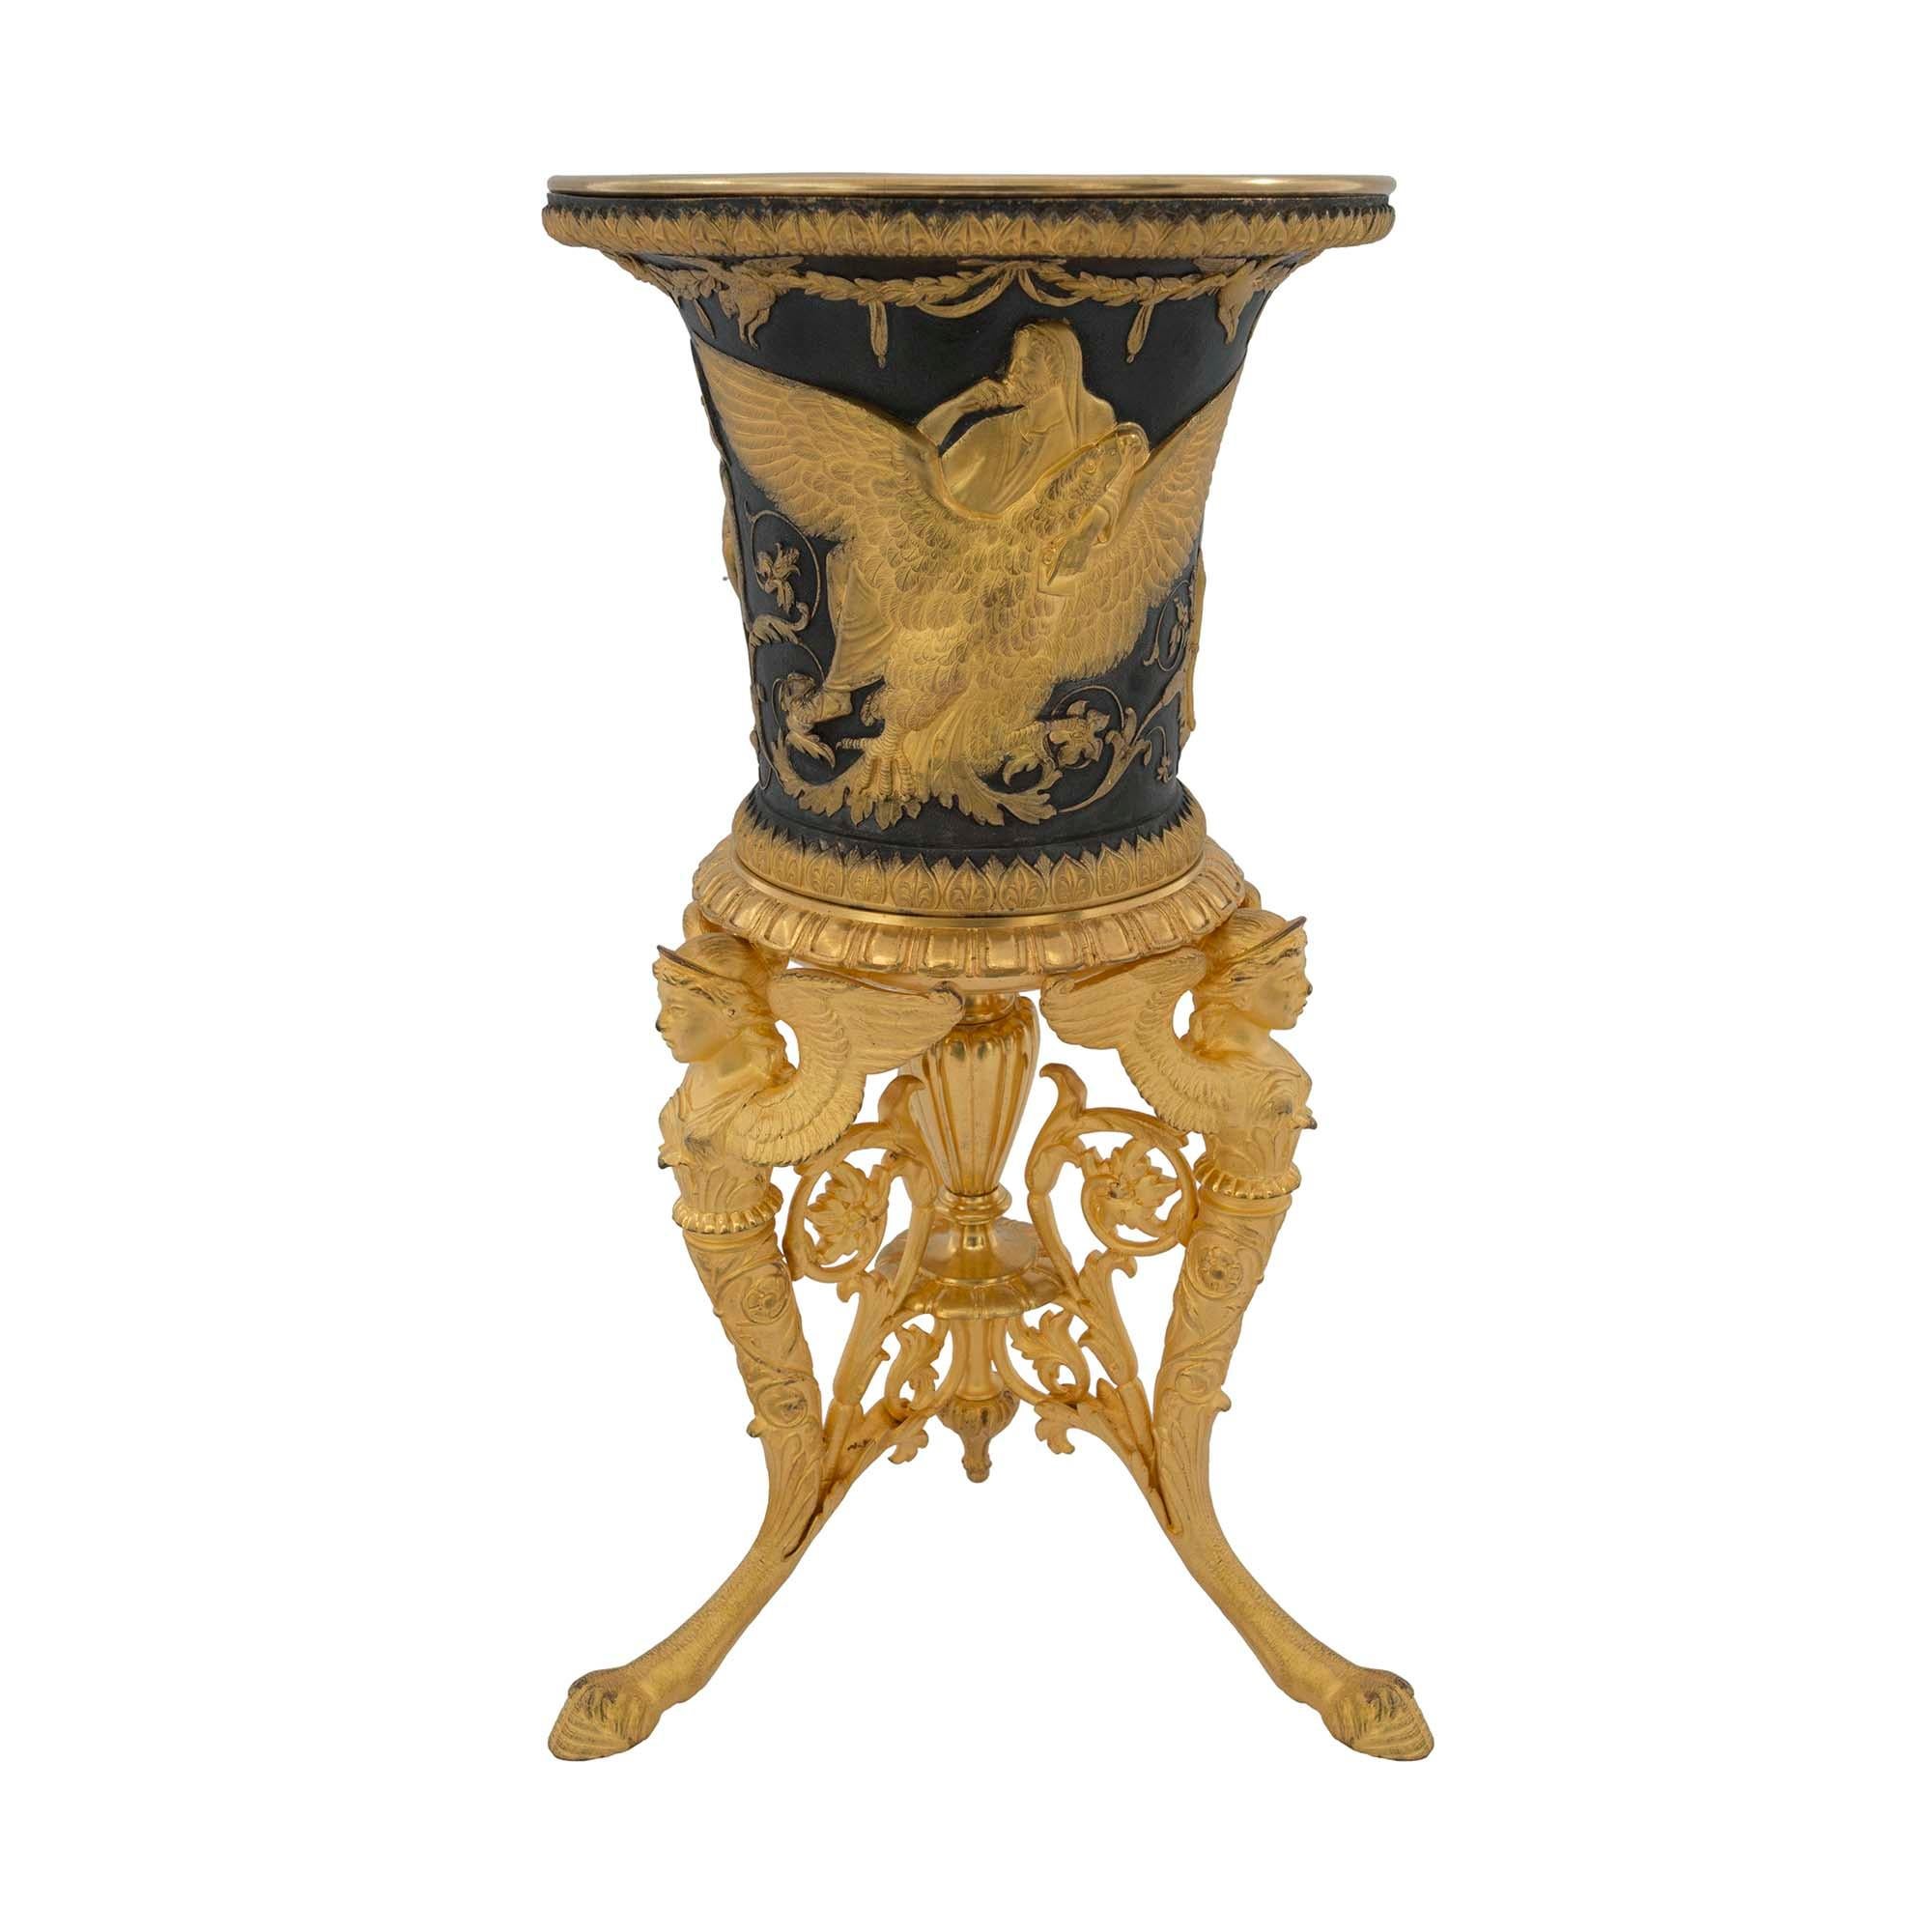 French 19th Century Neoclassical Style Bronze and Ormolu Urn In Good Condition For Sale In West Palm Beach, FL